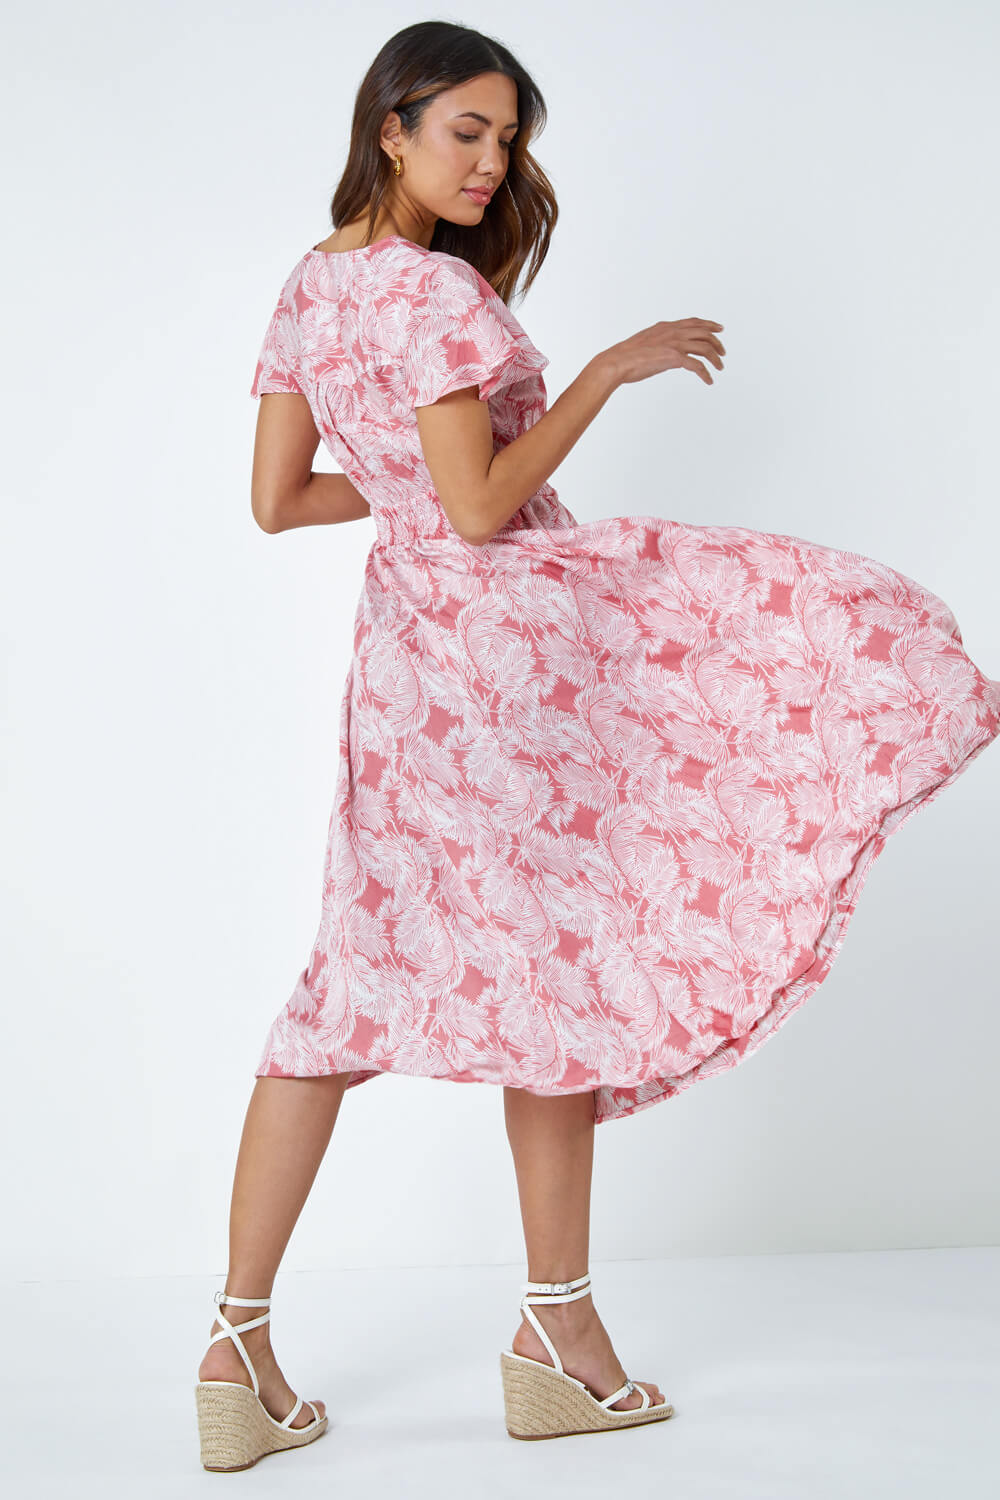 CORAL Palm Print Tiered Midi Dress, Image 3 of 5